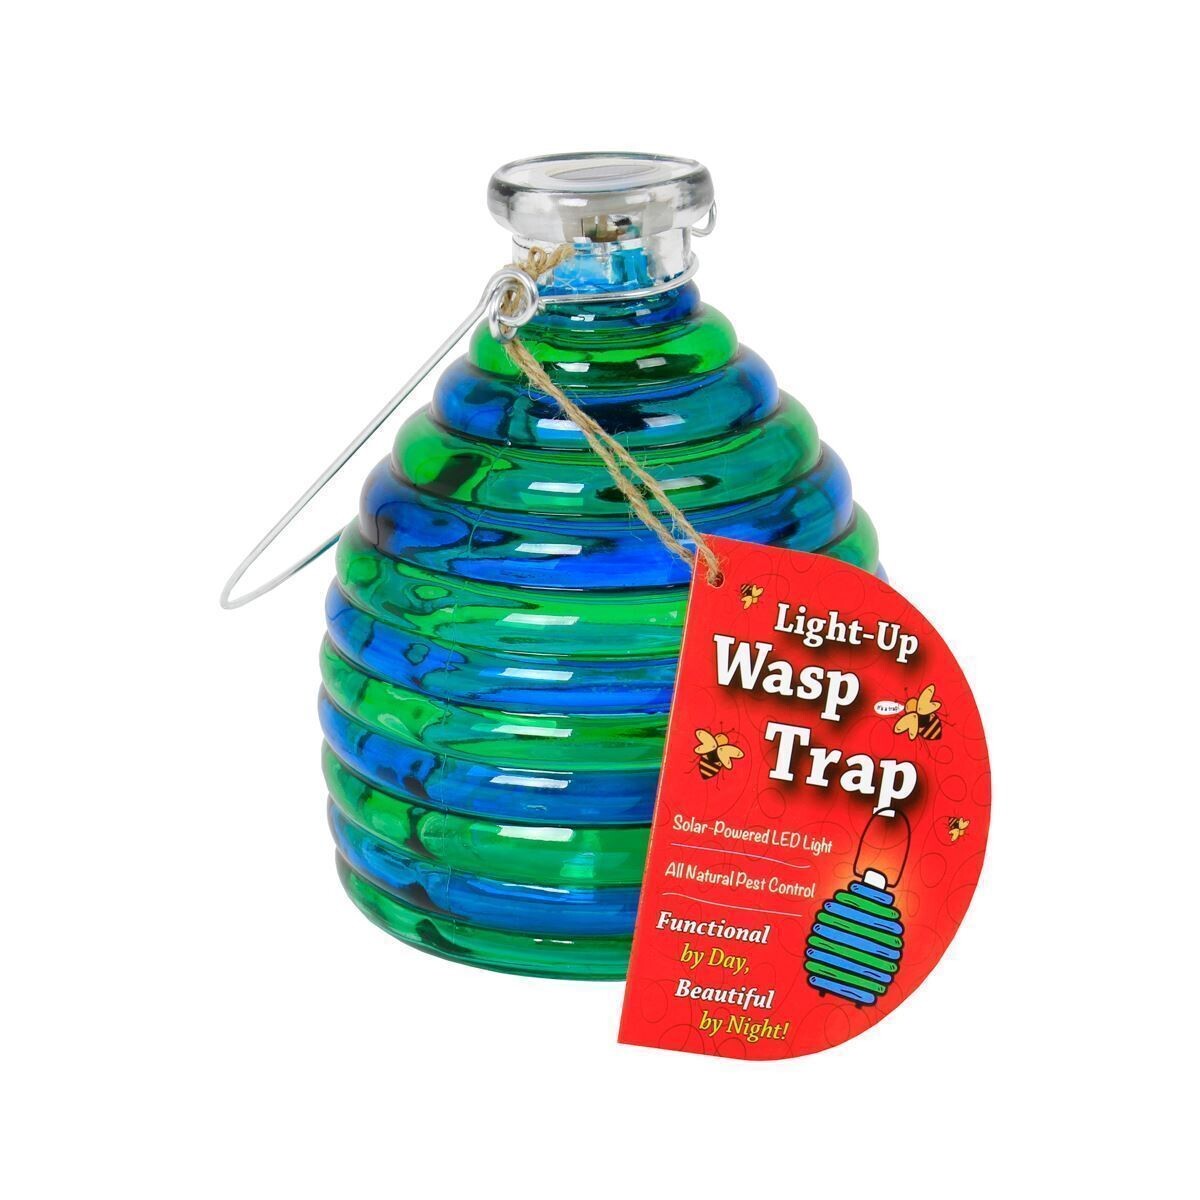 Light-Up Wasp Trap blue/green